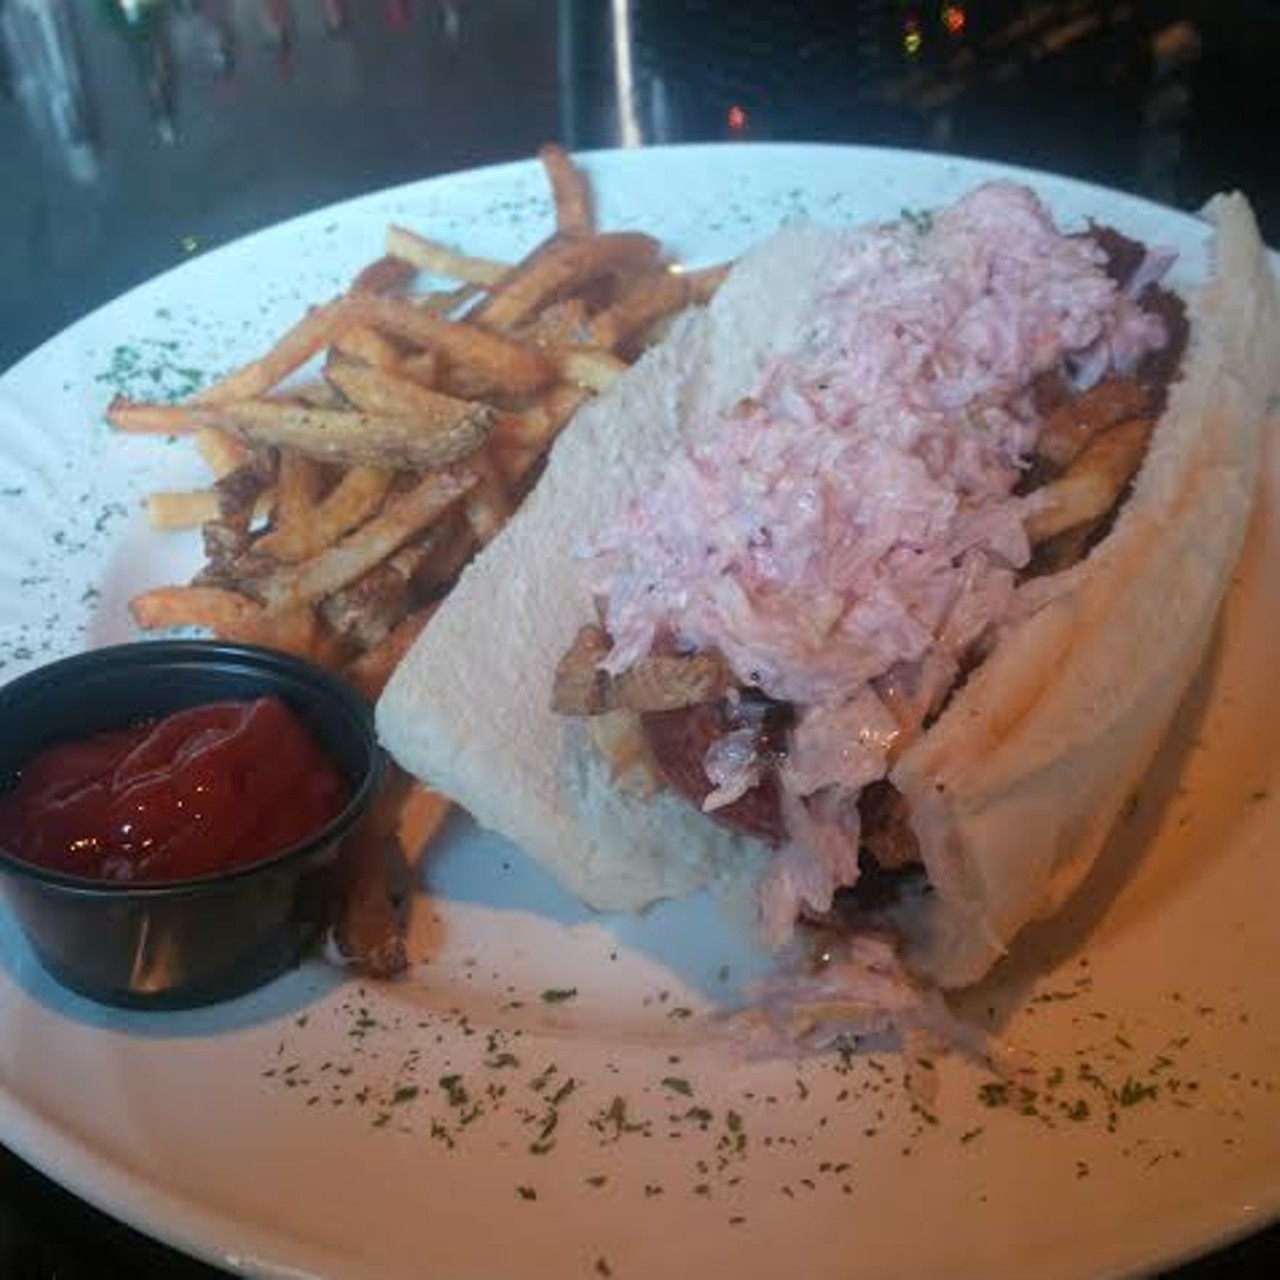 Alligator sausage is topped with French fries, BBQ sauce, and cole slaw resting on a hoagie bun. Try it.